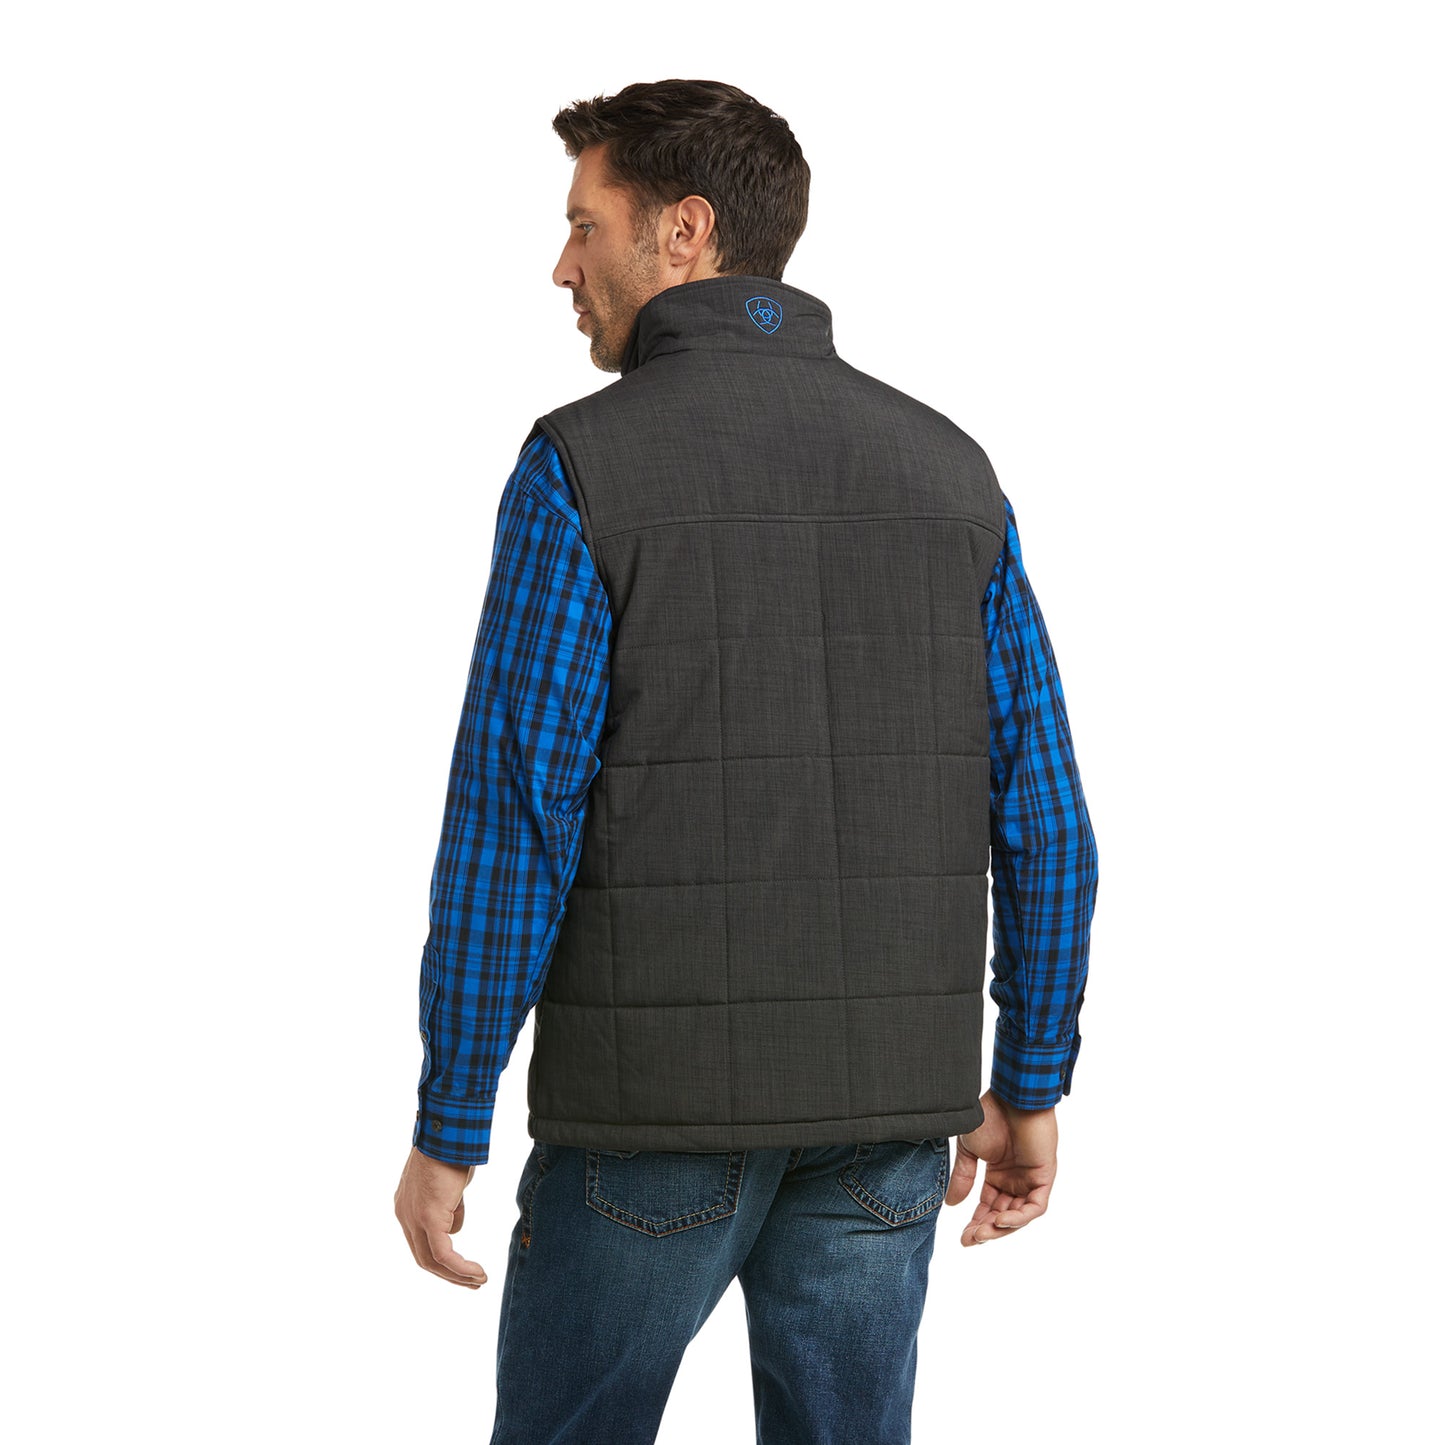 Ariat Men's Crius Charcoal Concealed Carry Insulated Vest 10037549